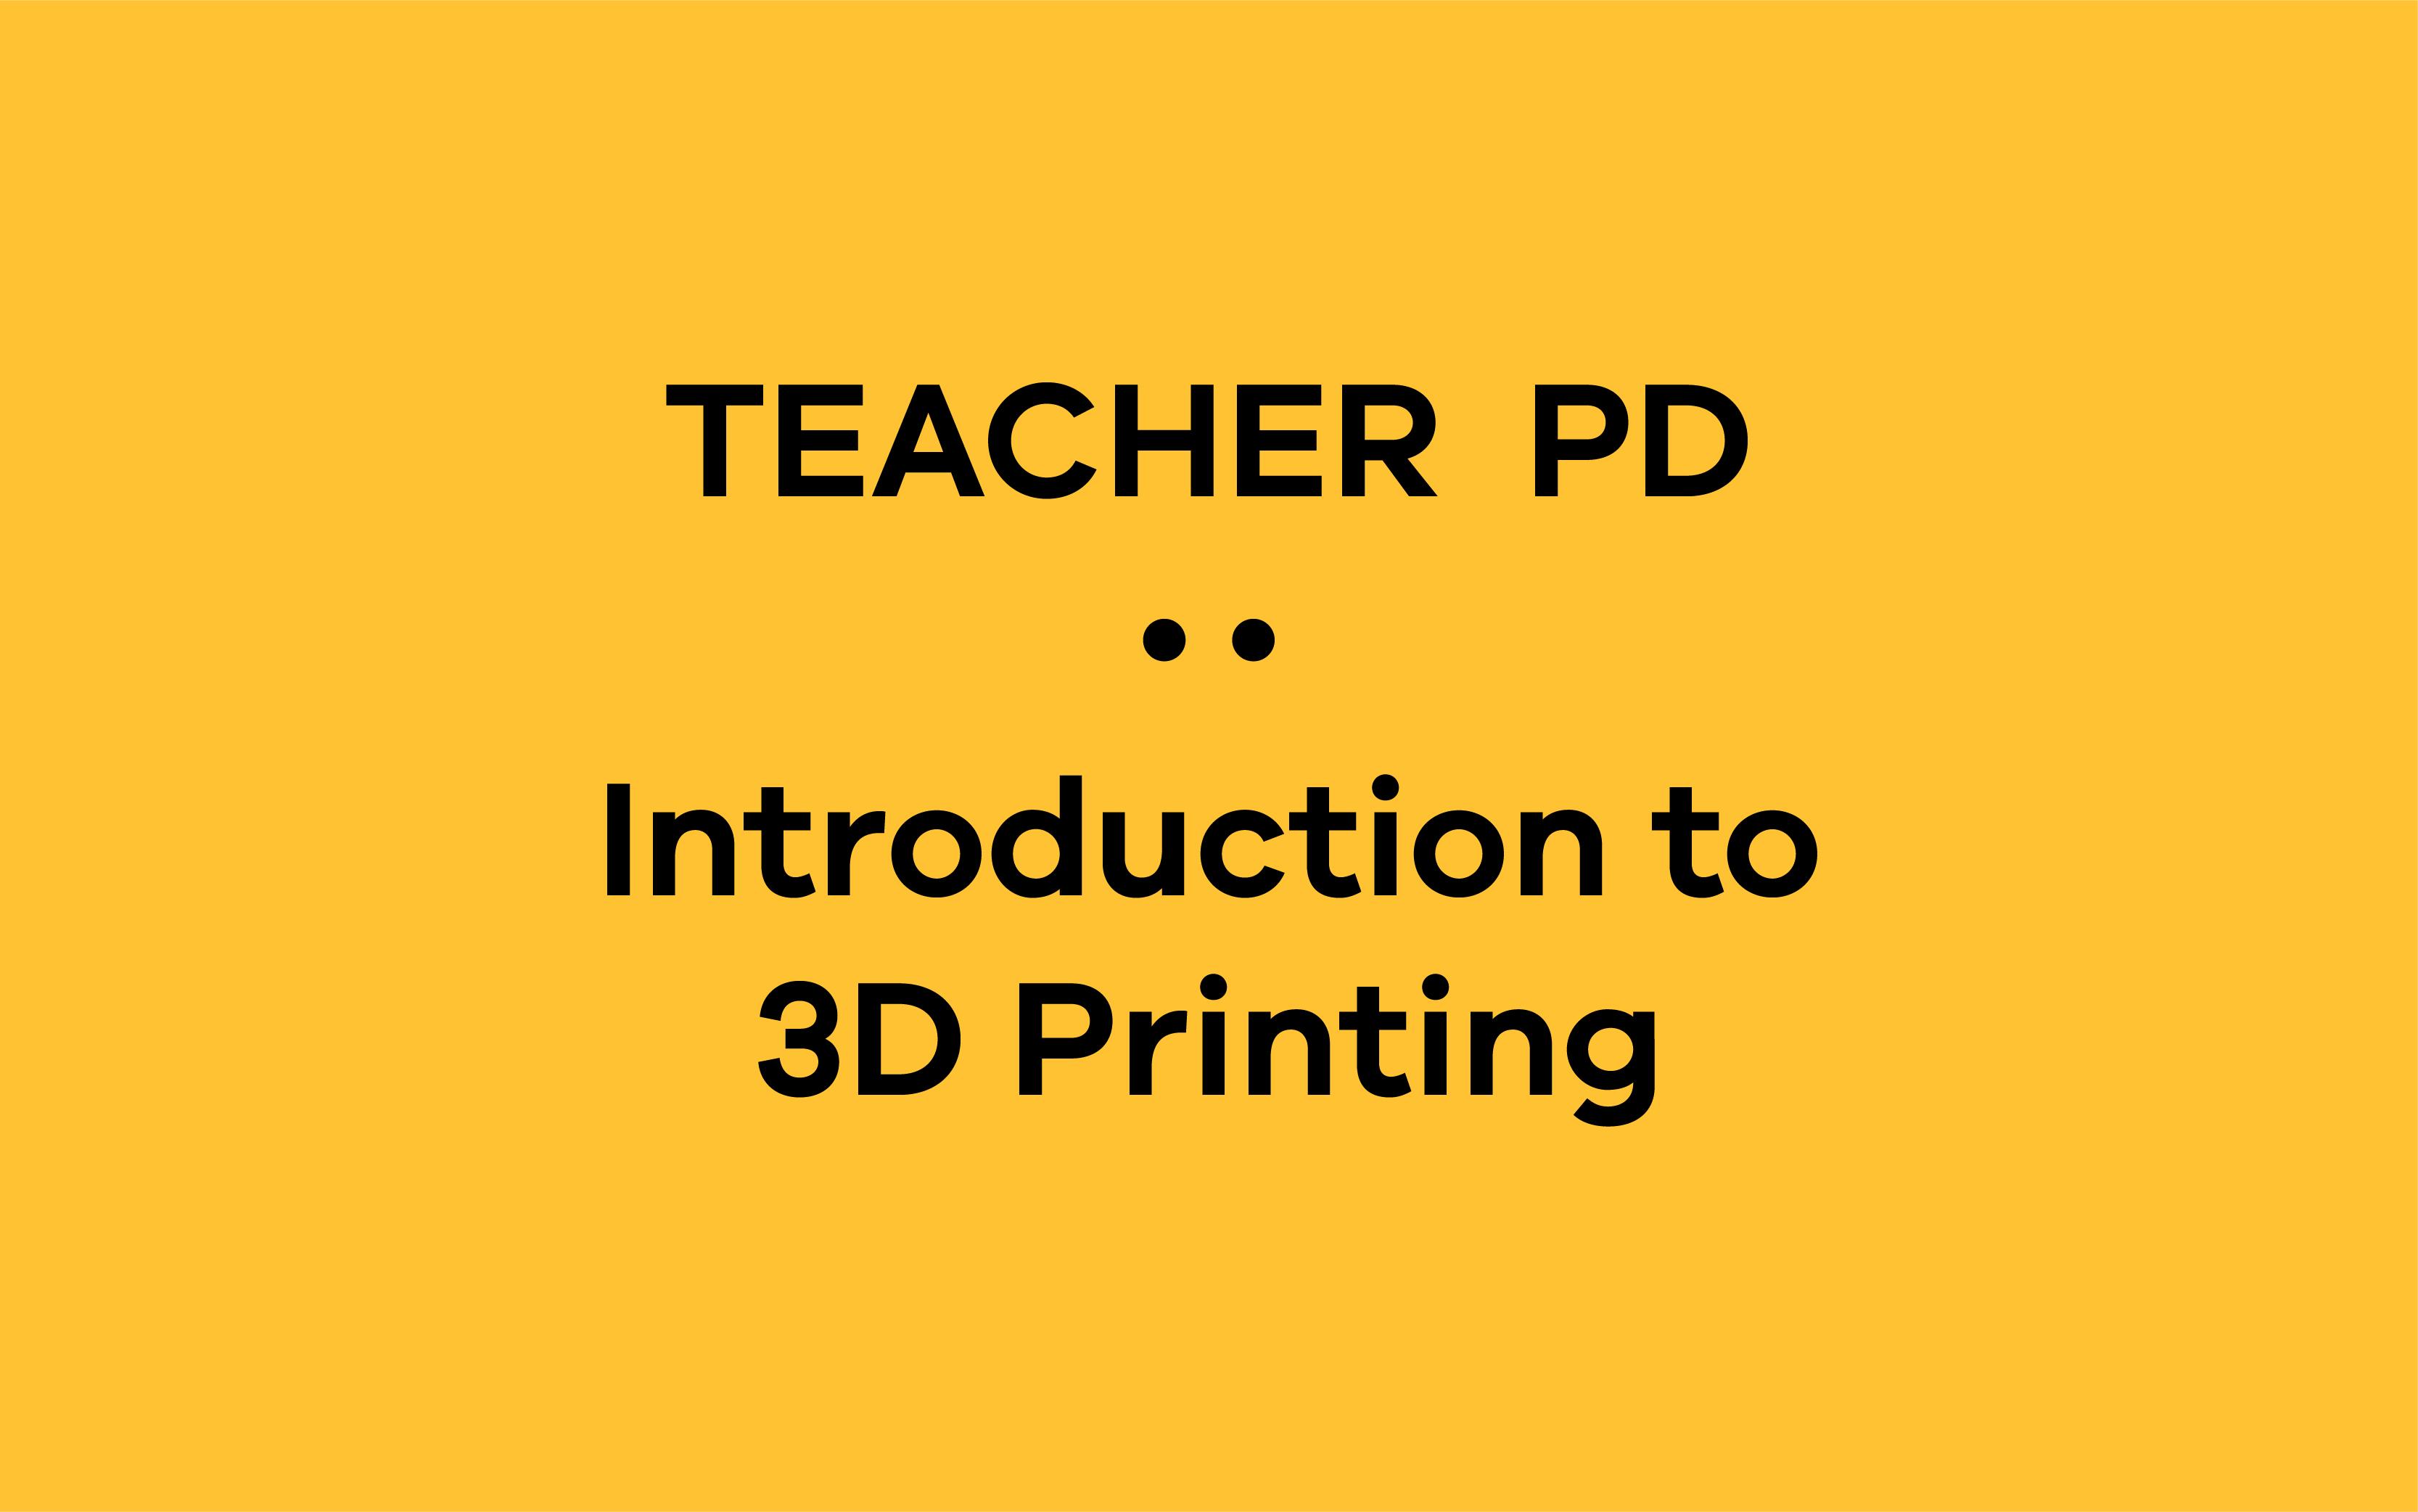 2021 - Introduction to: 3D Printing